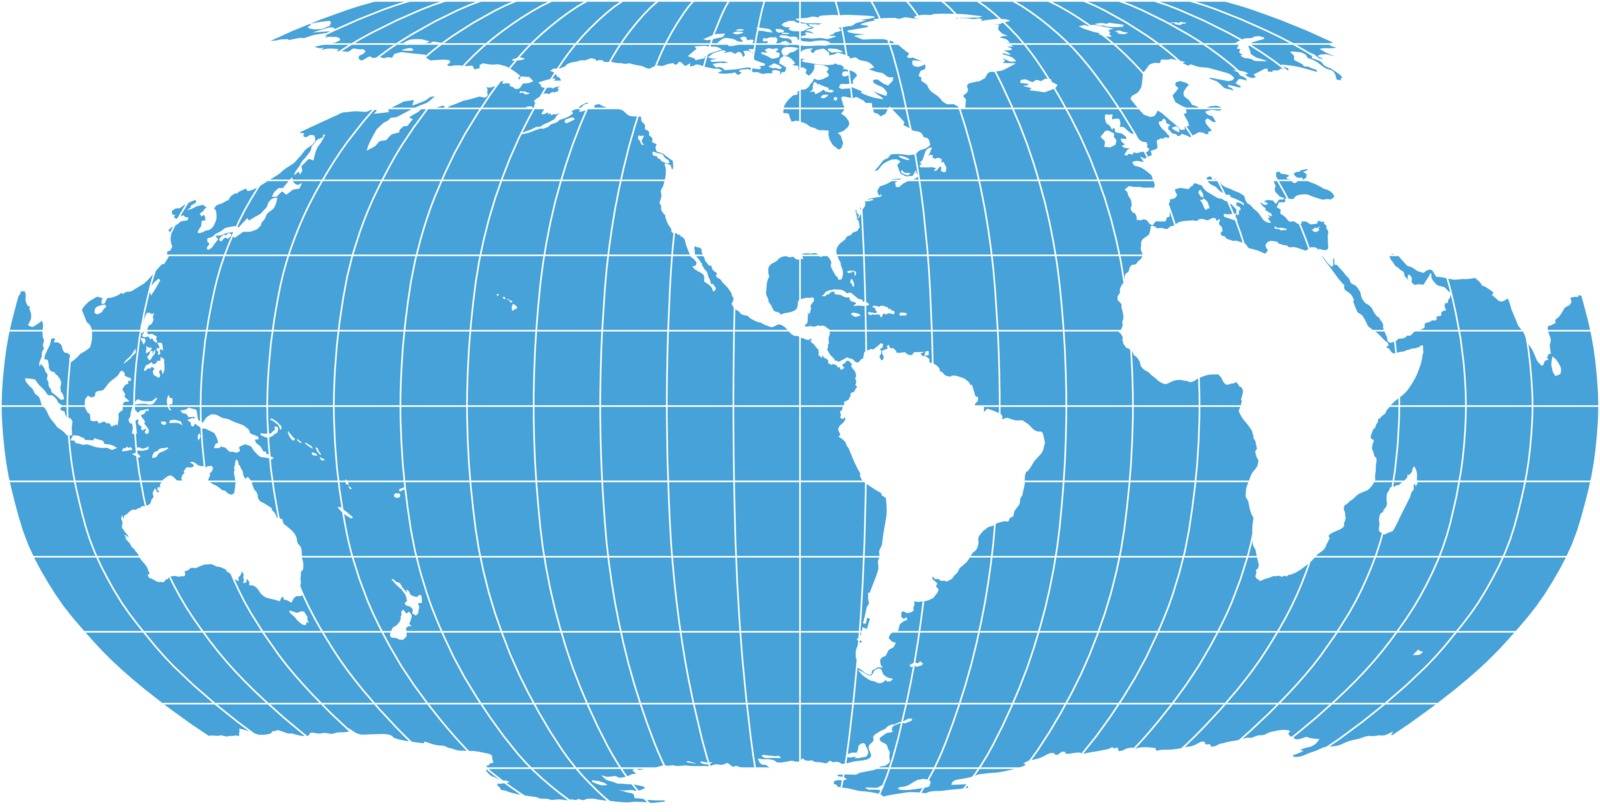 World Map in Robinson Projection with meridians and parallels grid. Americas centered. White land and blue sea. Vector illustration by pyty